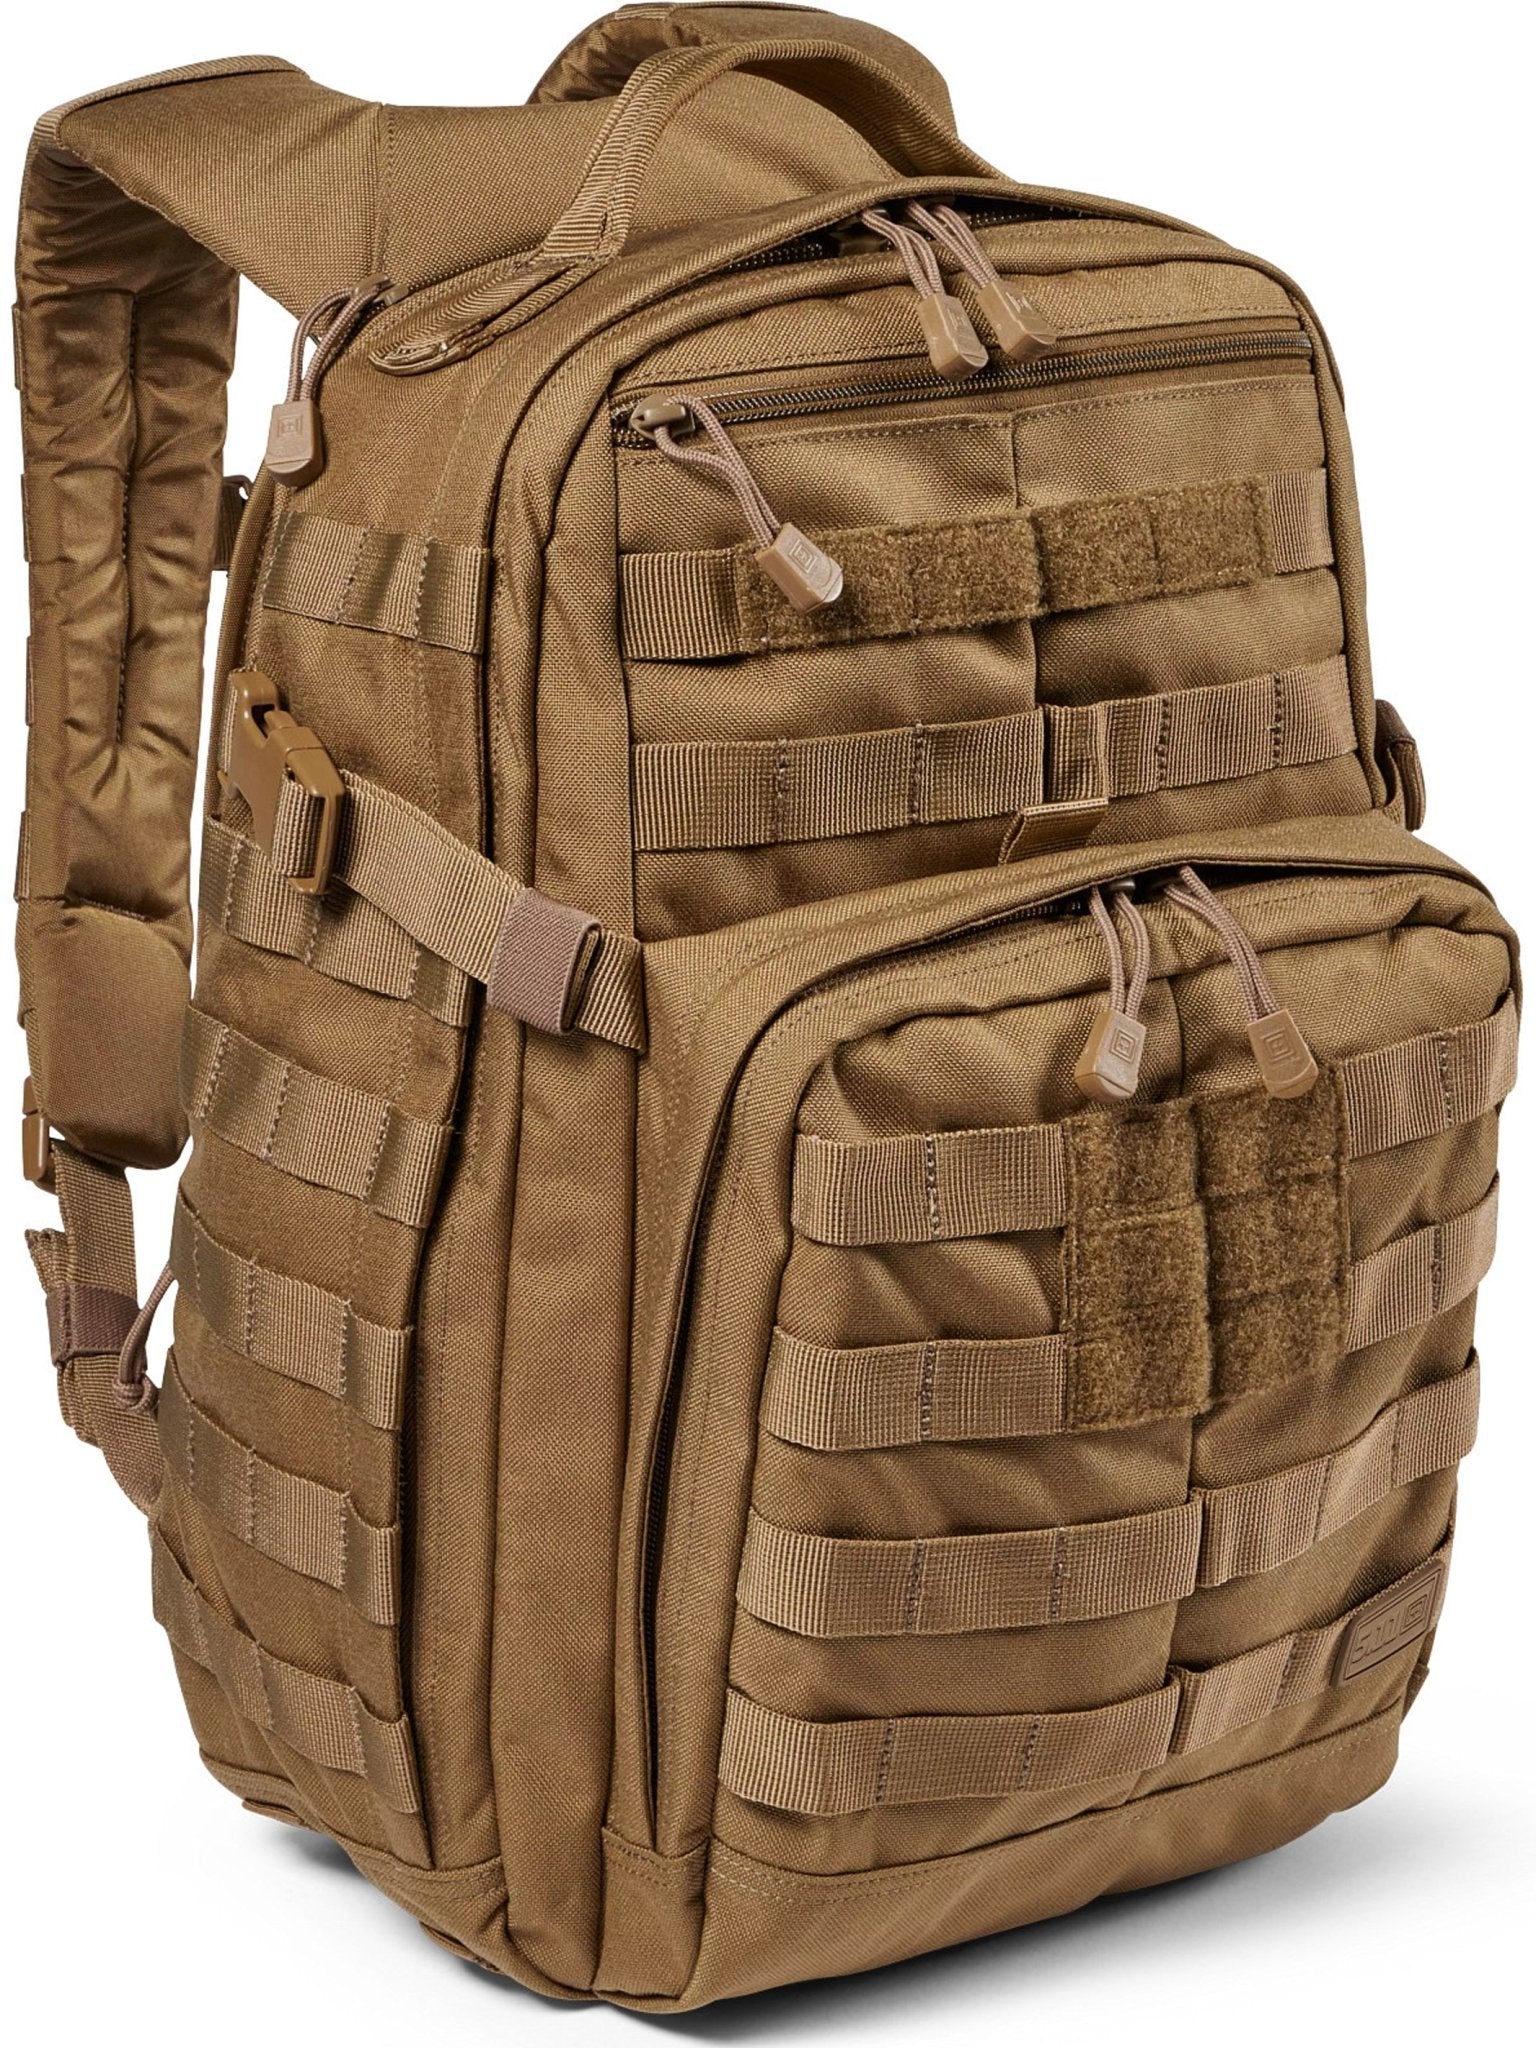 4elementsclothing5.11 Tactical5.11 Tactical - 5.11 Tactical Rush 12 2.0 Backpack with Laptop compartment - Style 56561Bag56561-134